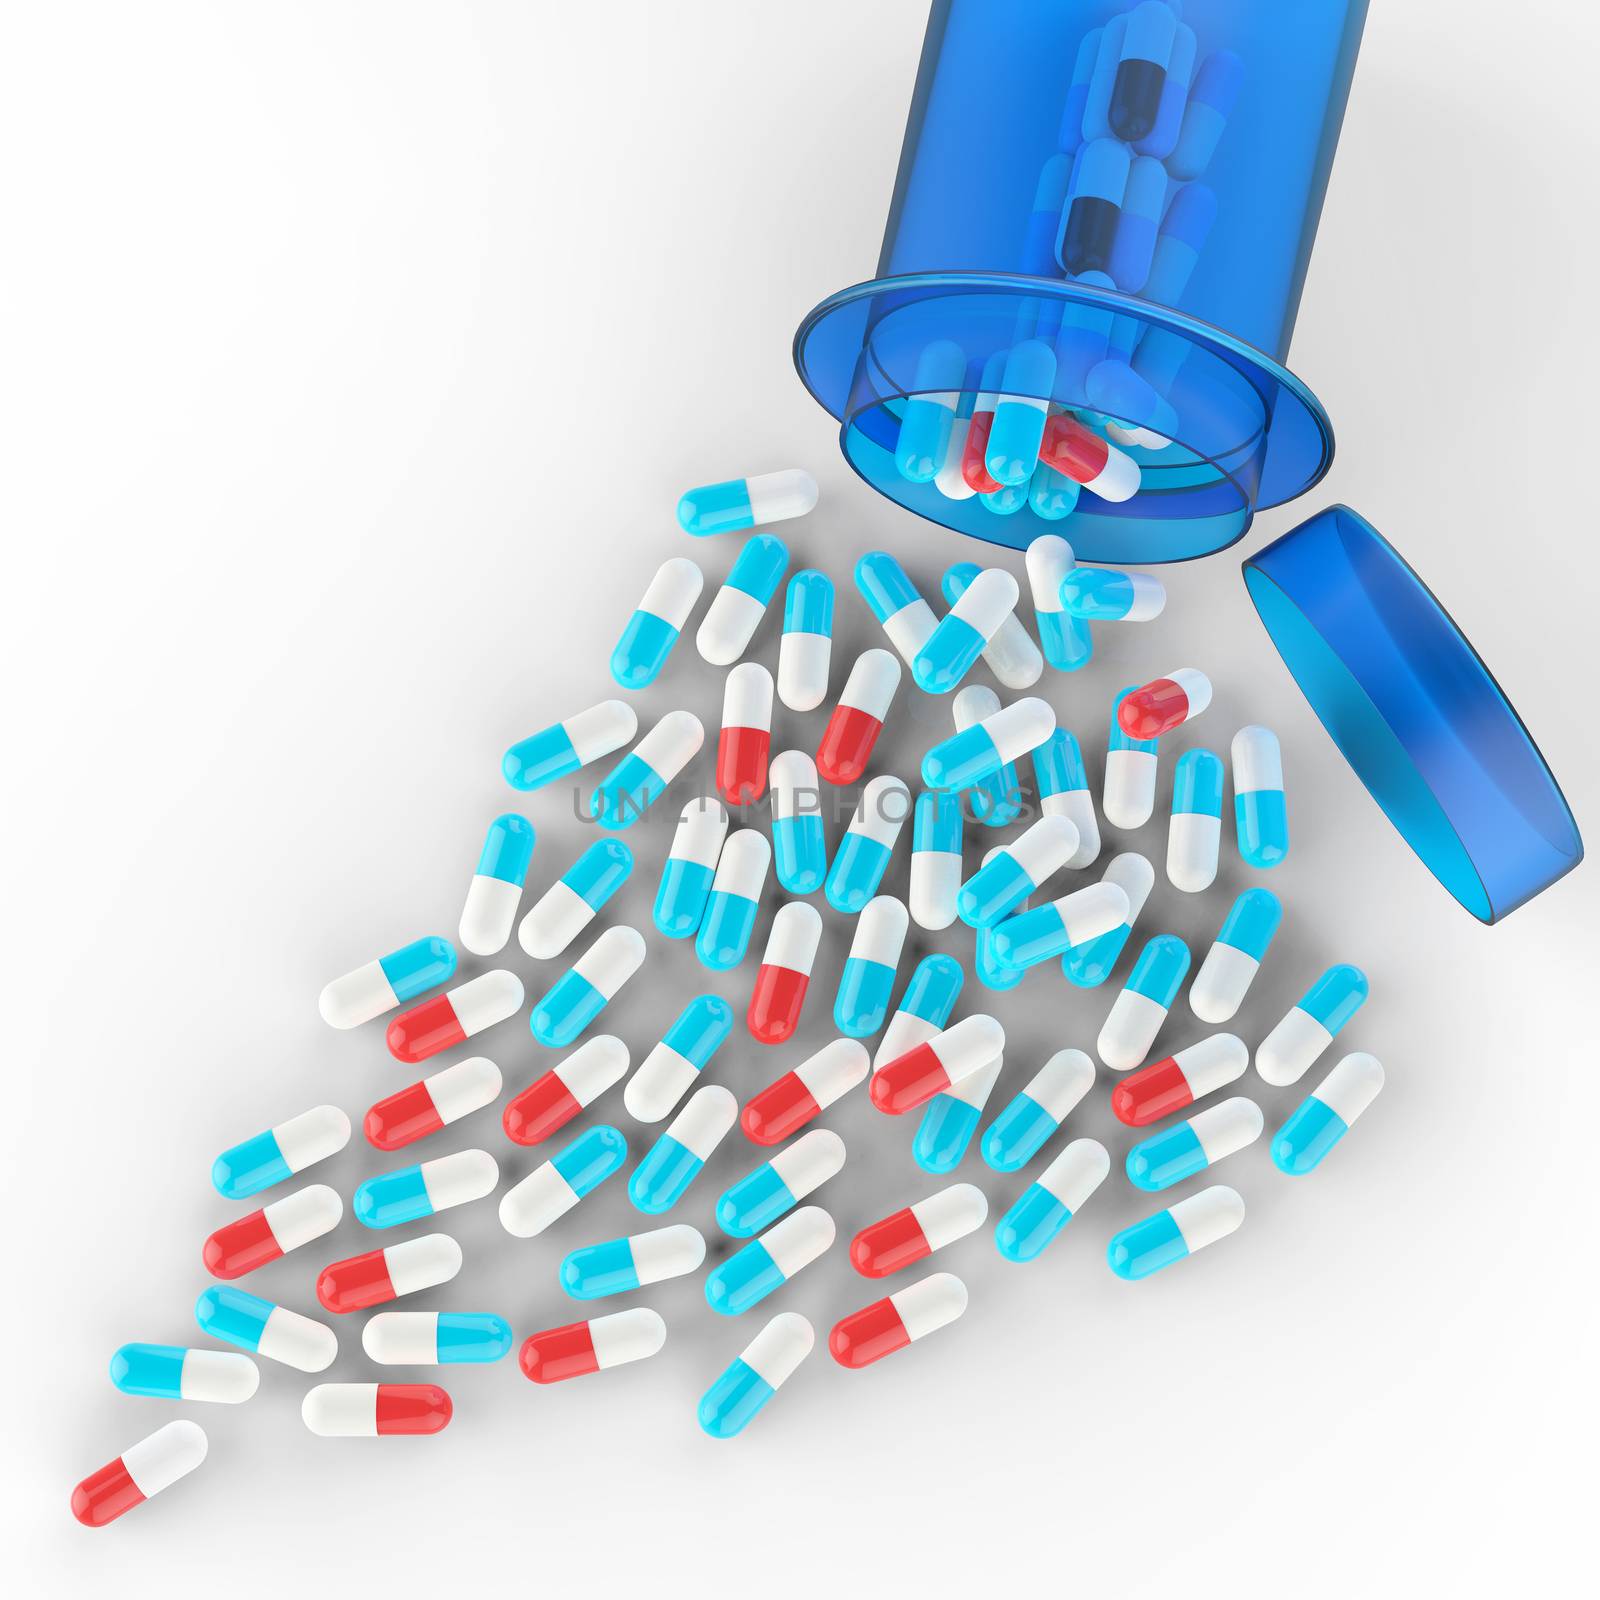 Pills spilling out of pill bottle on white by everythingpossible